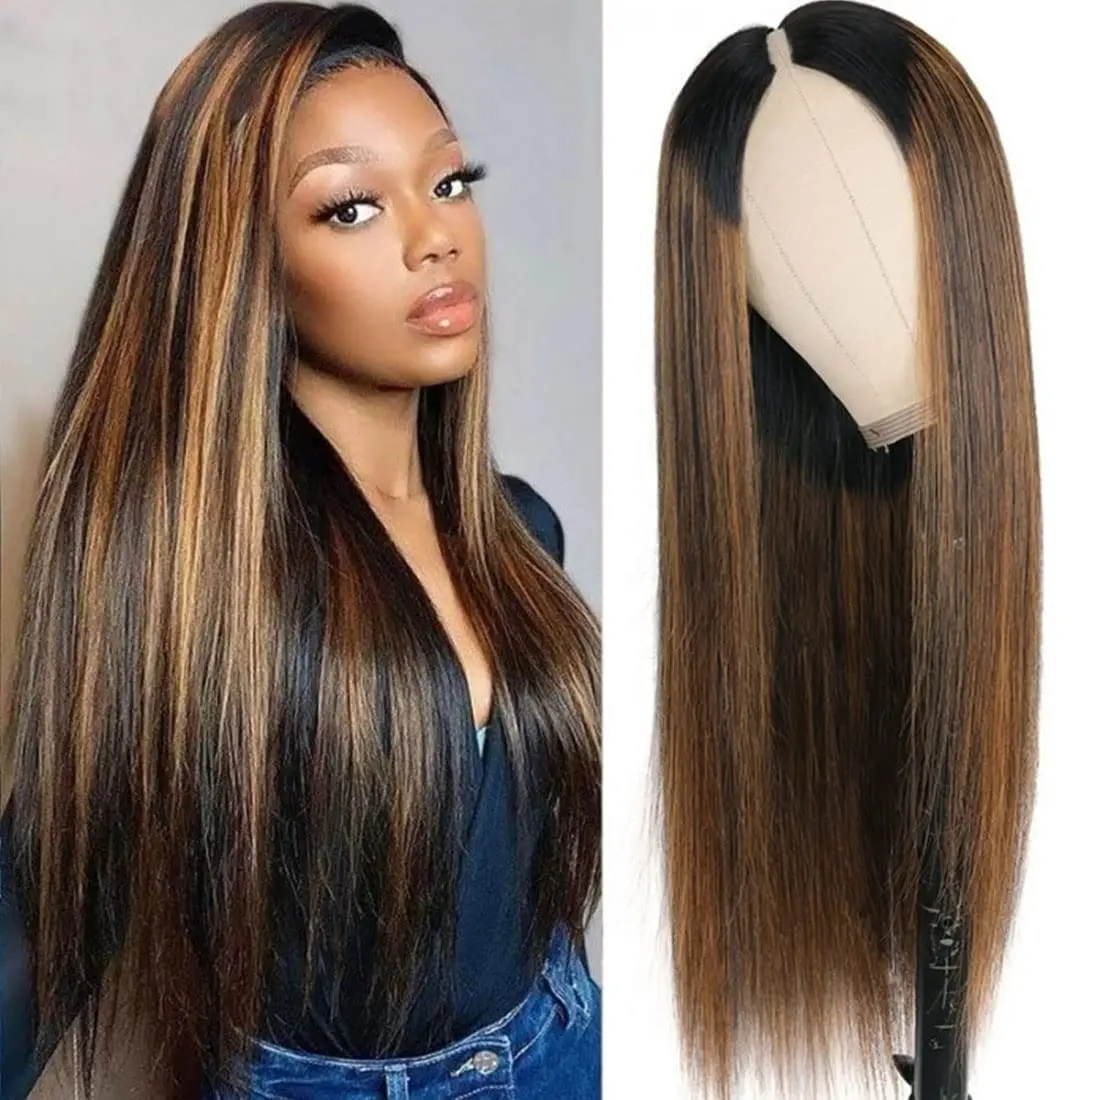 

Highlight Blonde 24 inch Silky Straight U Part Wig European Remy Human Hair Long Glueless Jewish Soft Wig For Black Women Daily